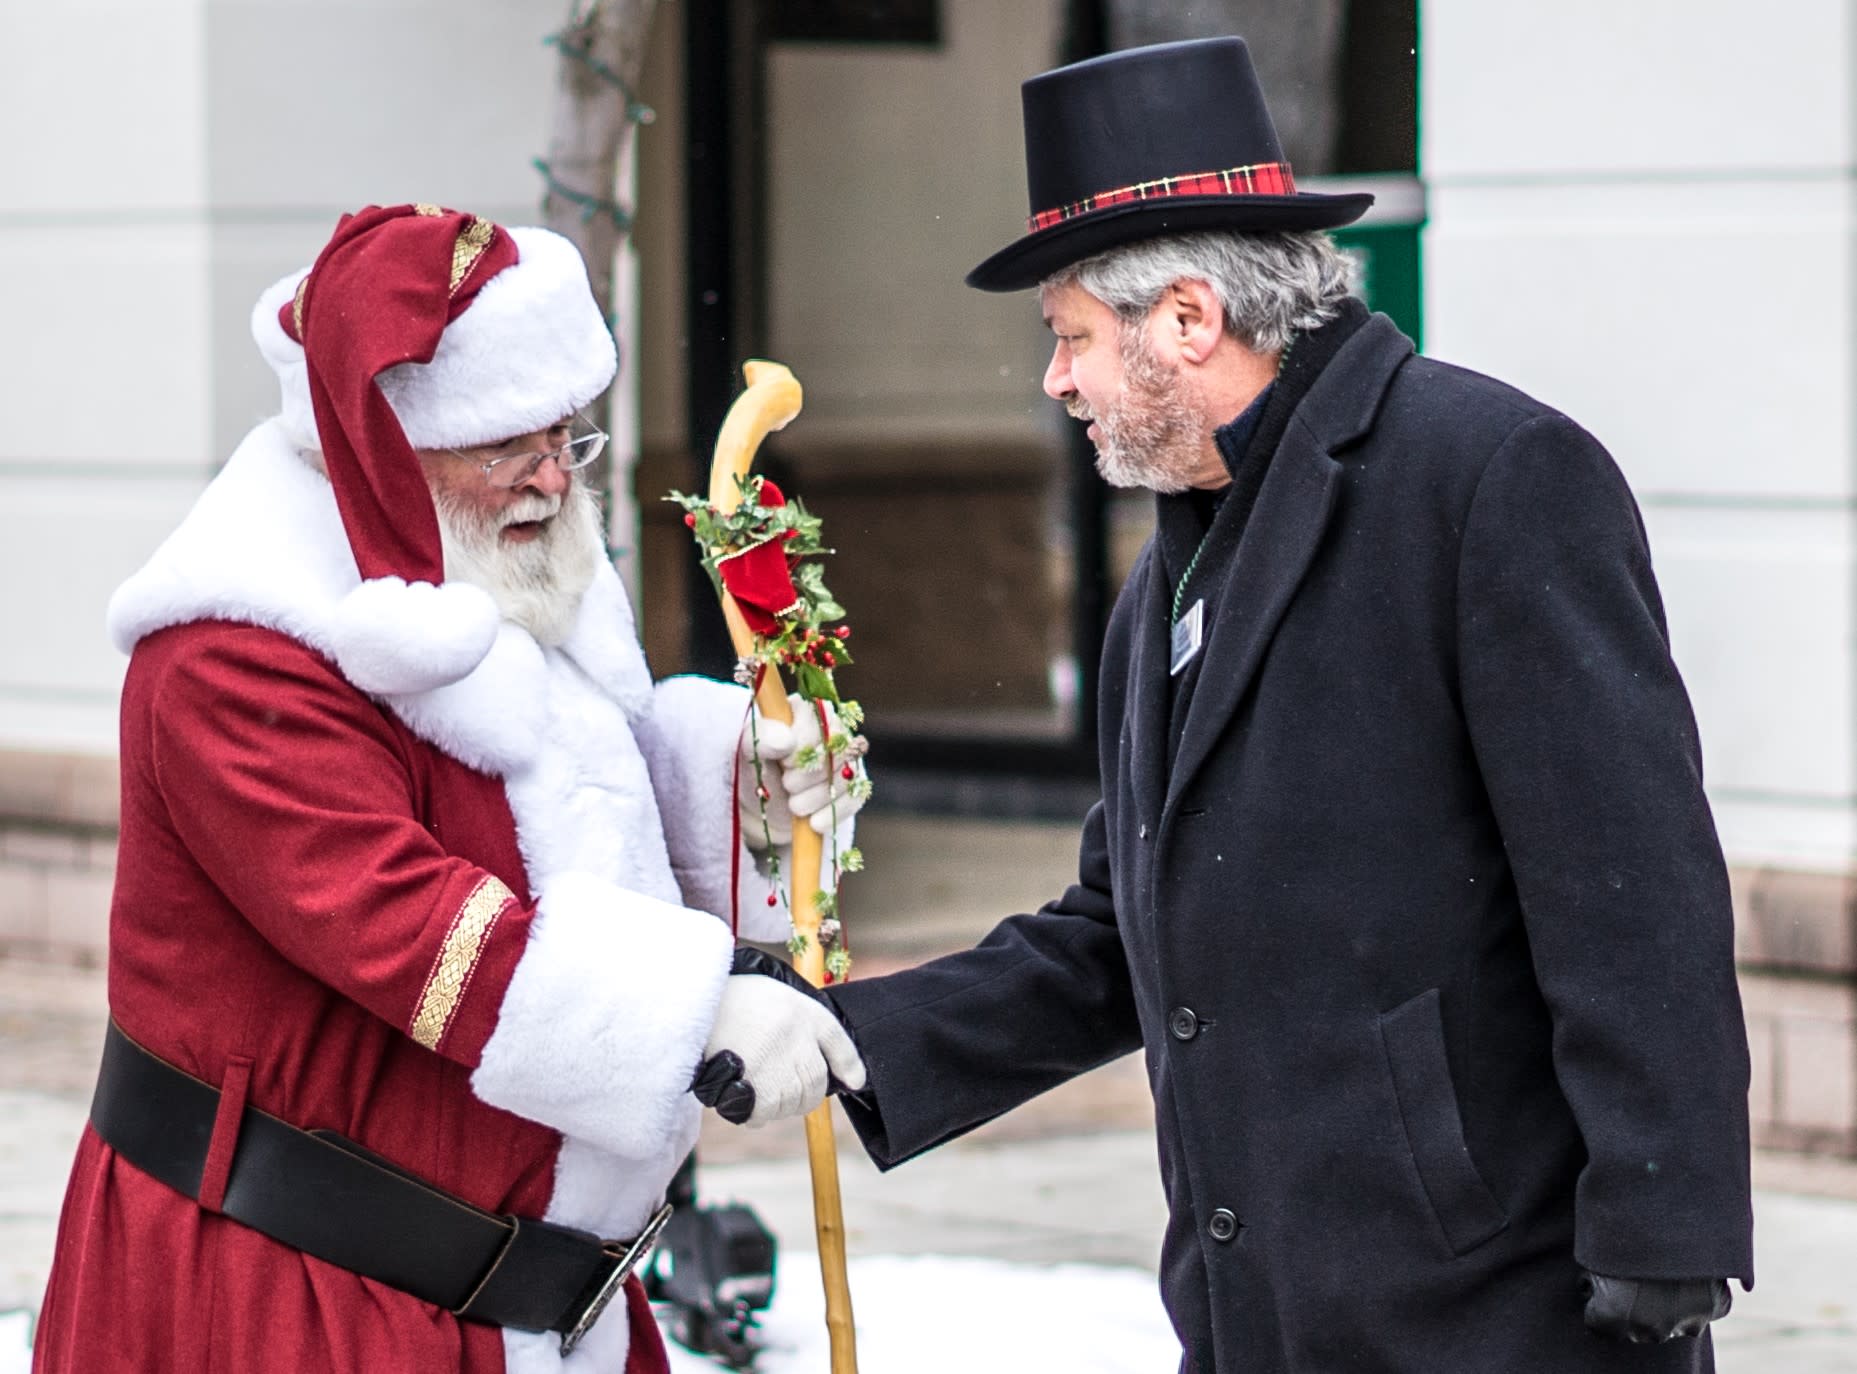 Dave Looby shaking hands with Santa Claus